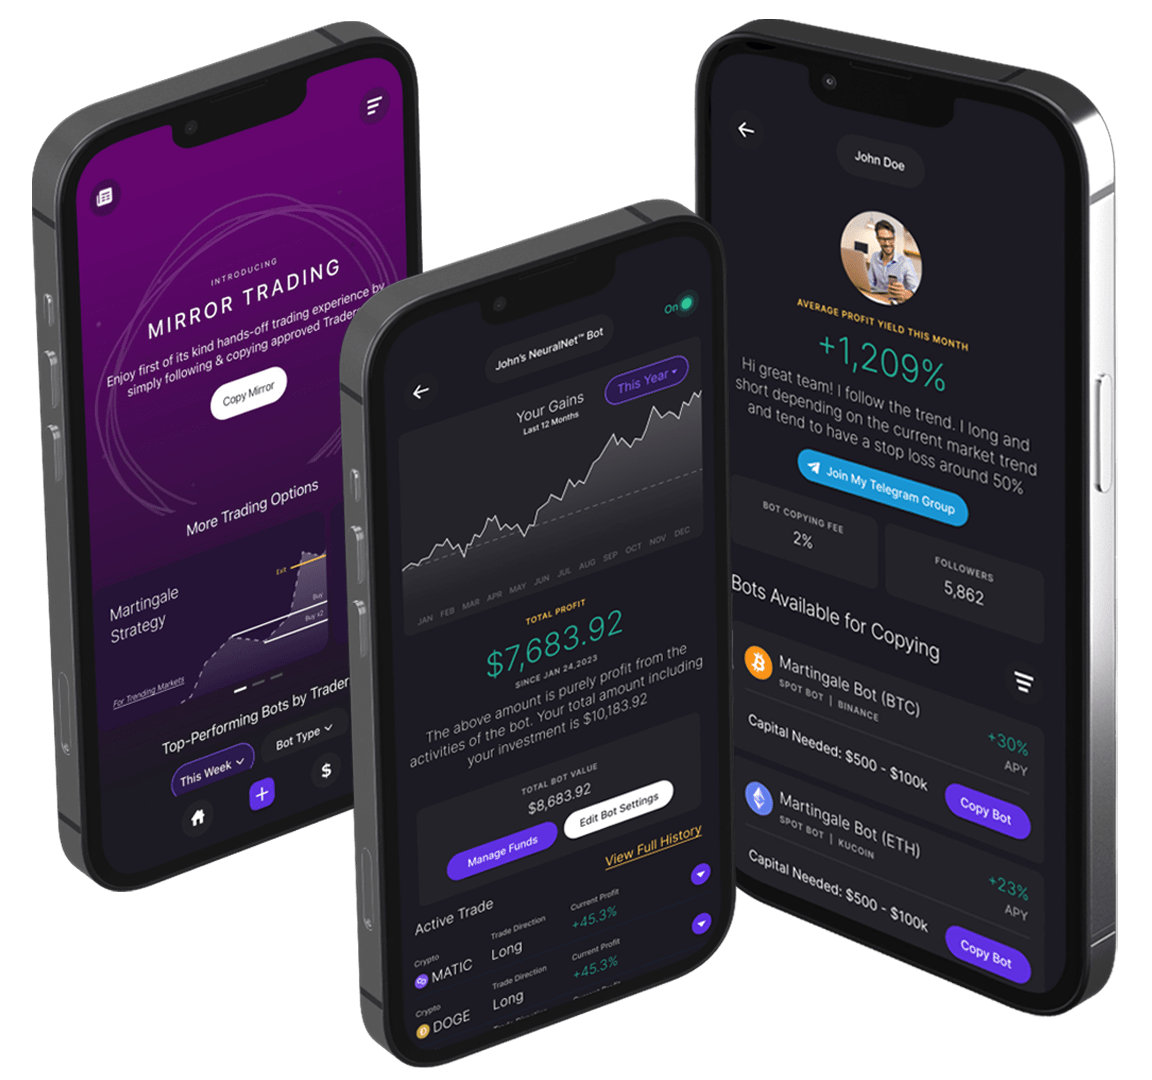 Tafabot mobile app offers different crypto trading bots